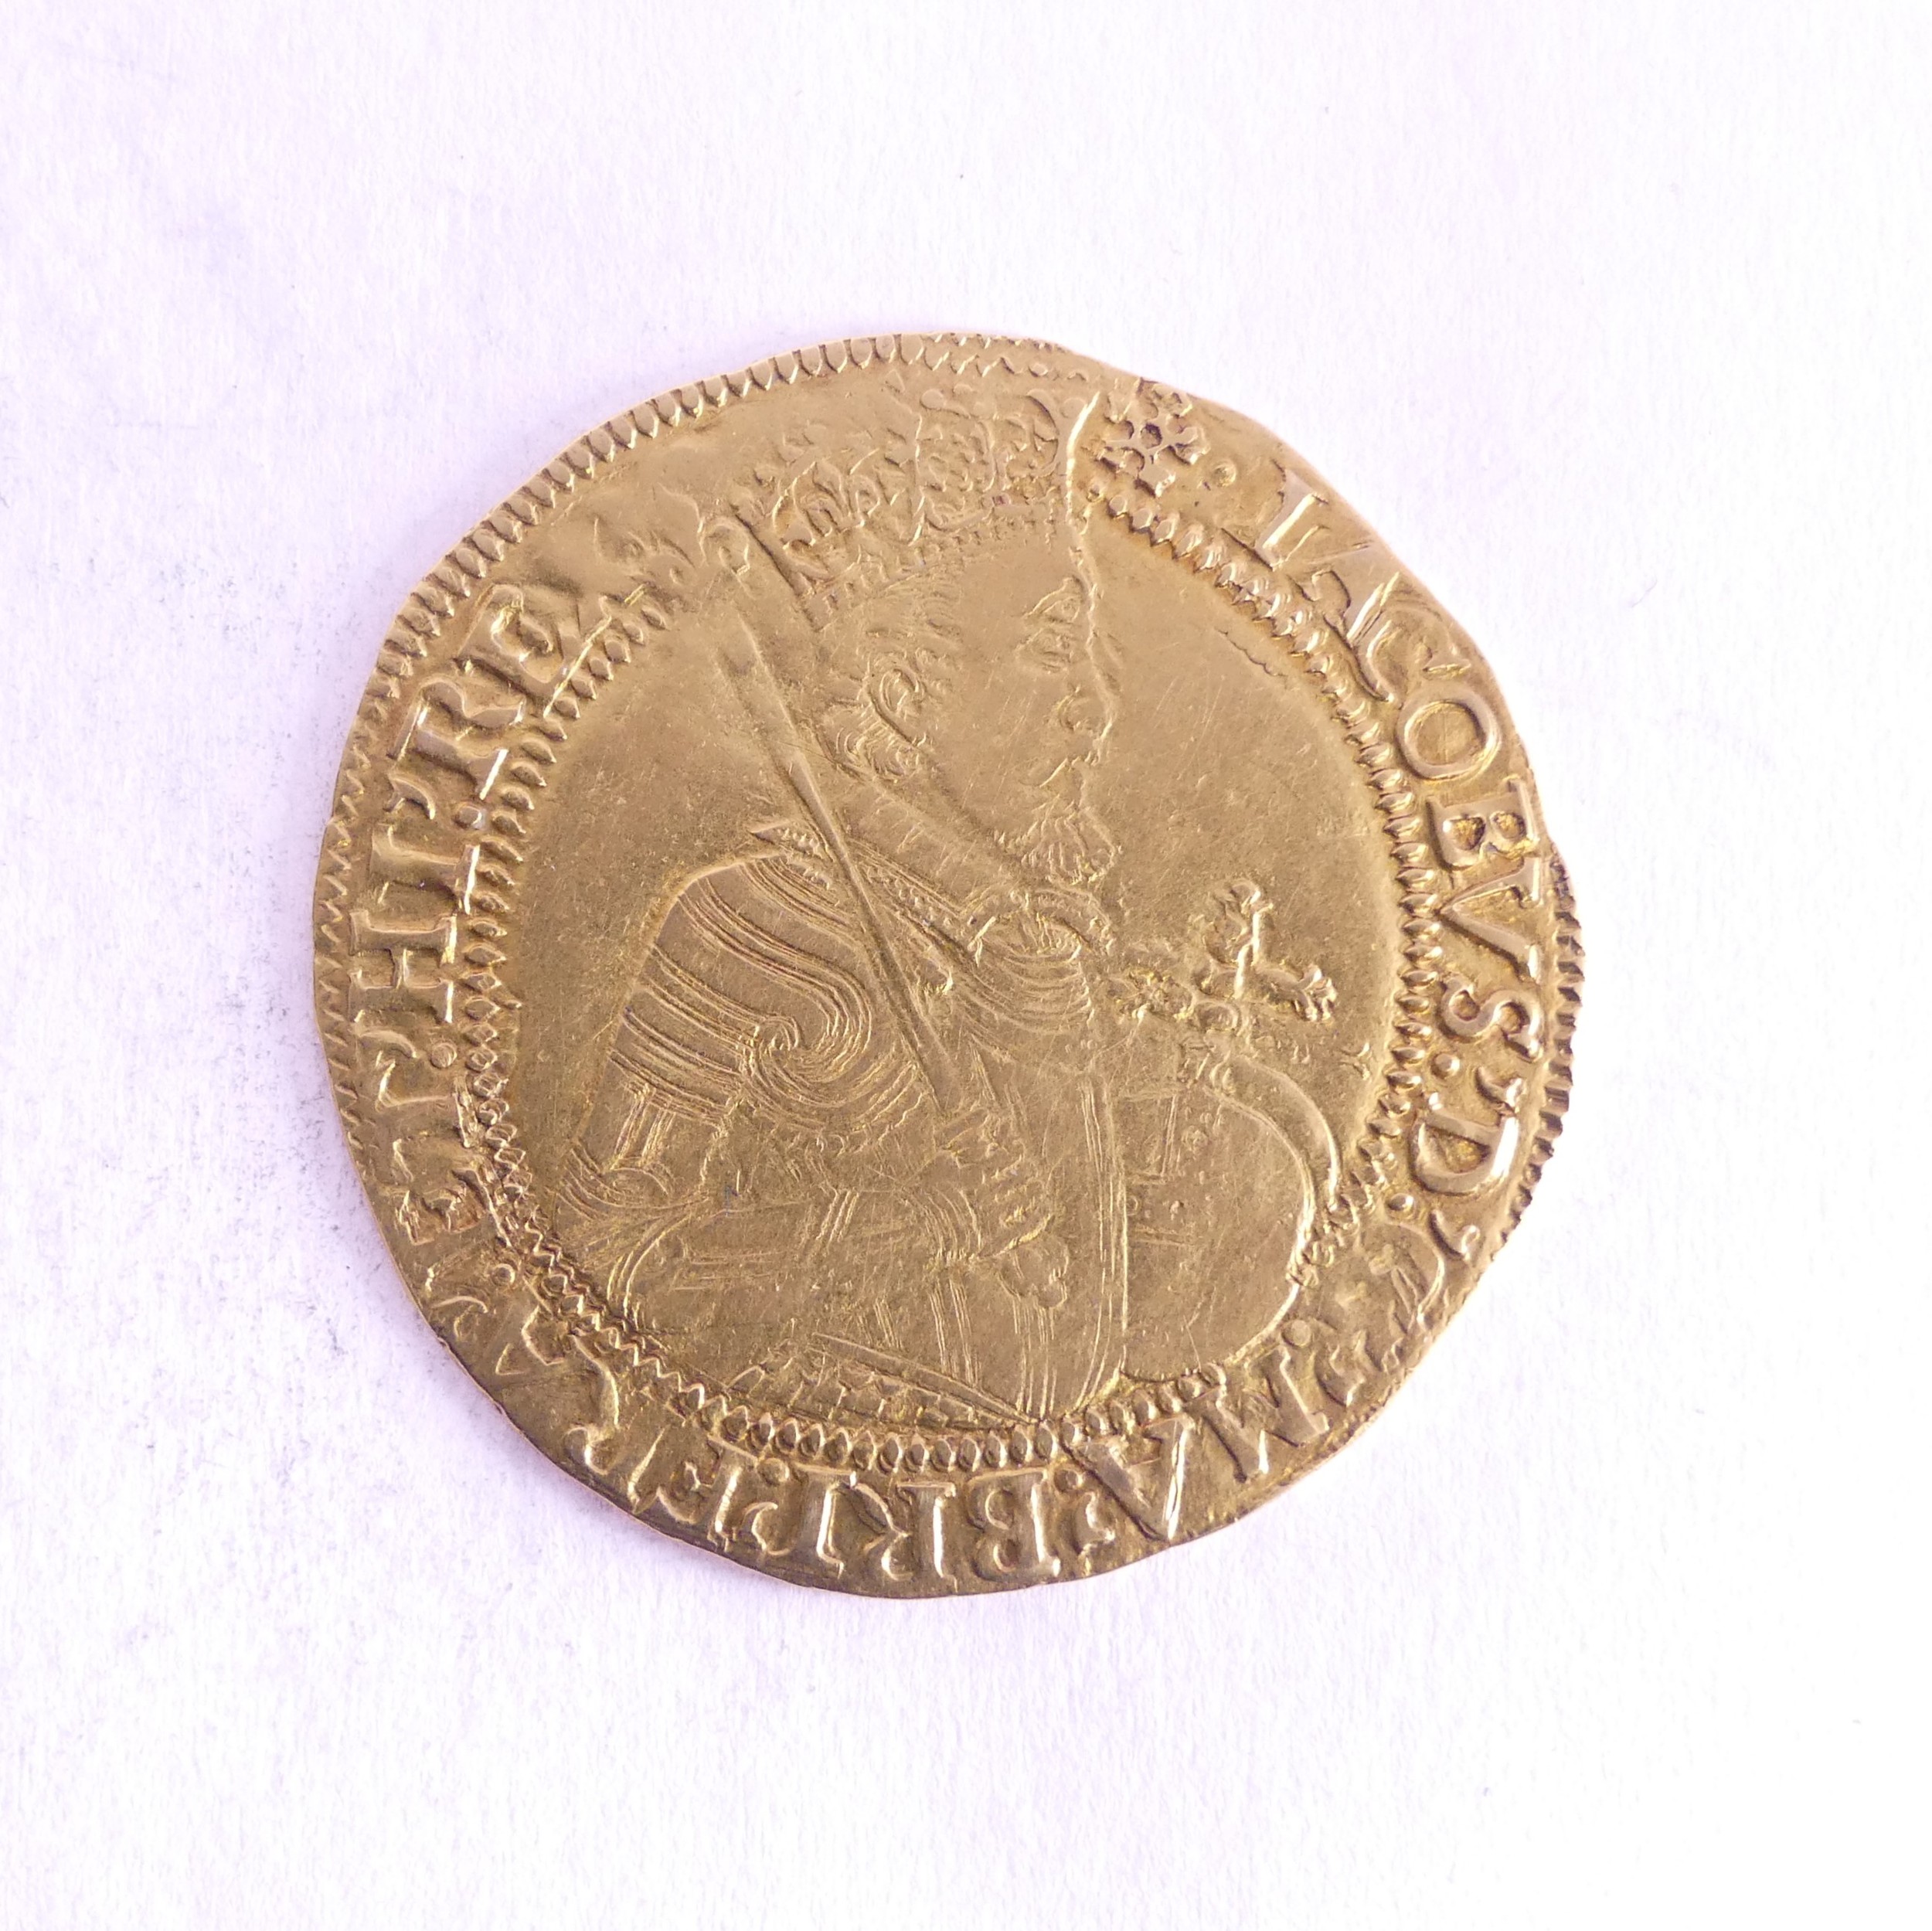 A James I (1603-25) gold Unite, 5th bust, mm. cinquefoil, the obverse doubly struck. Provenance; The